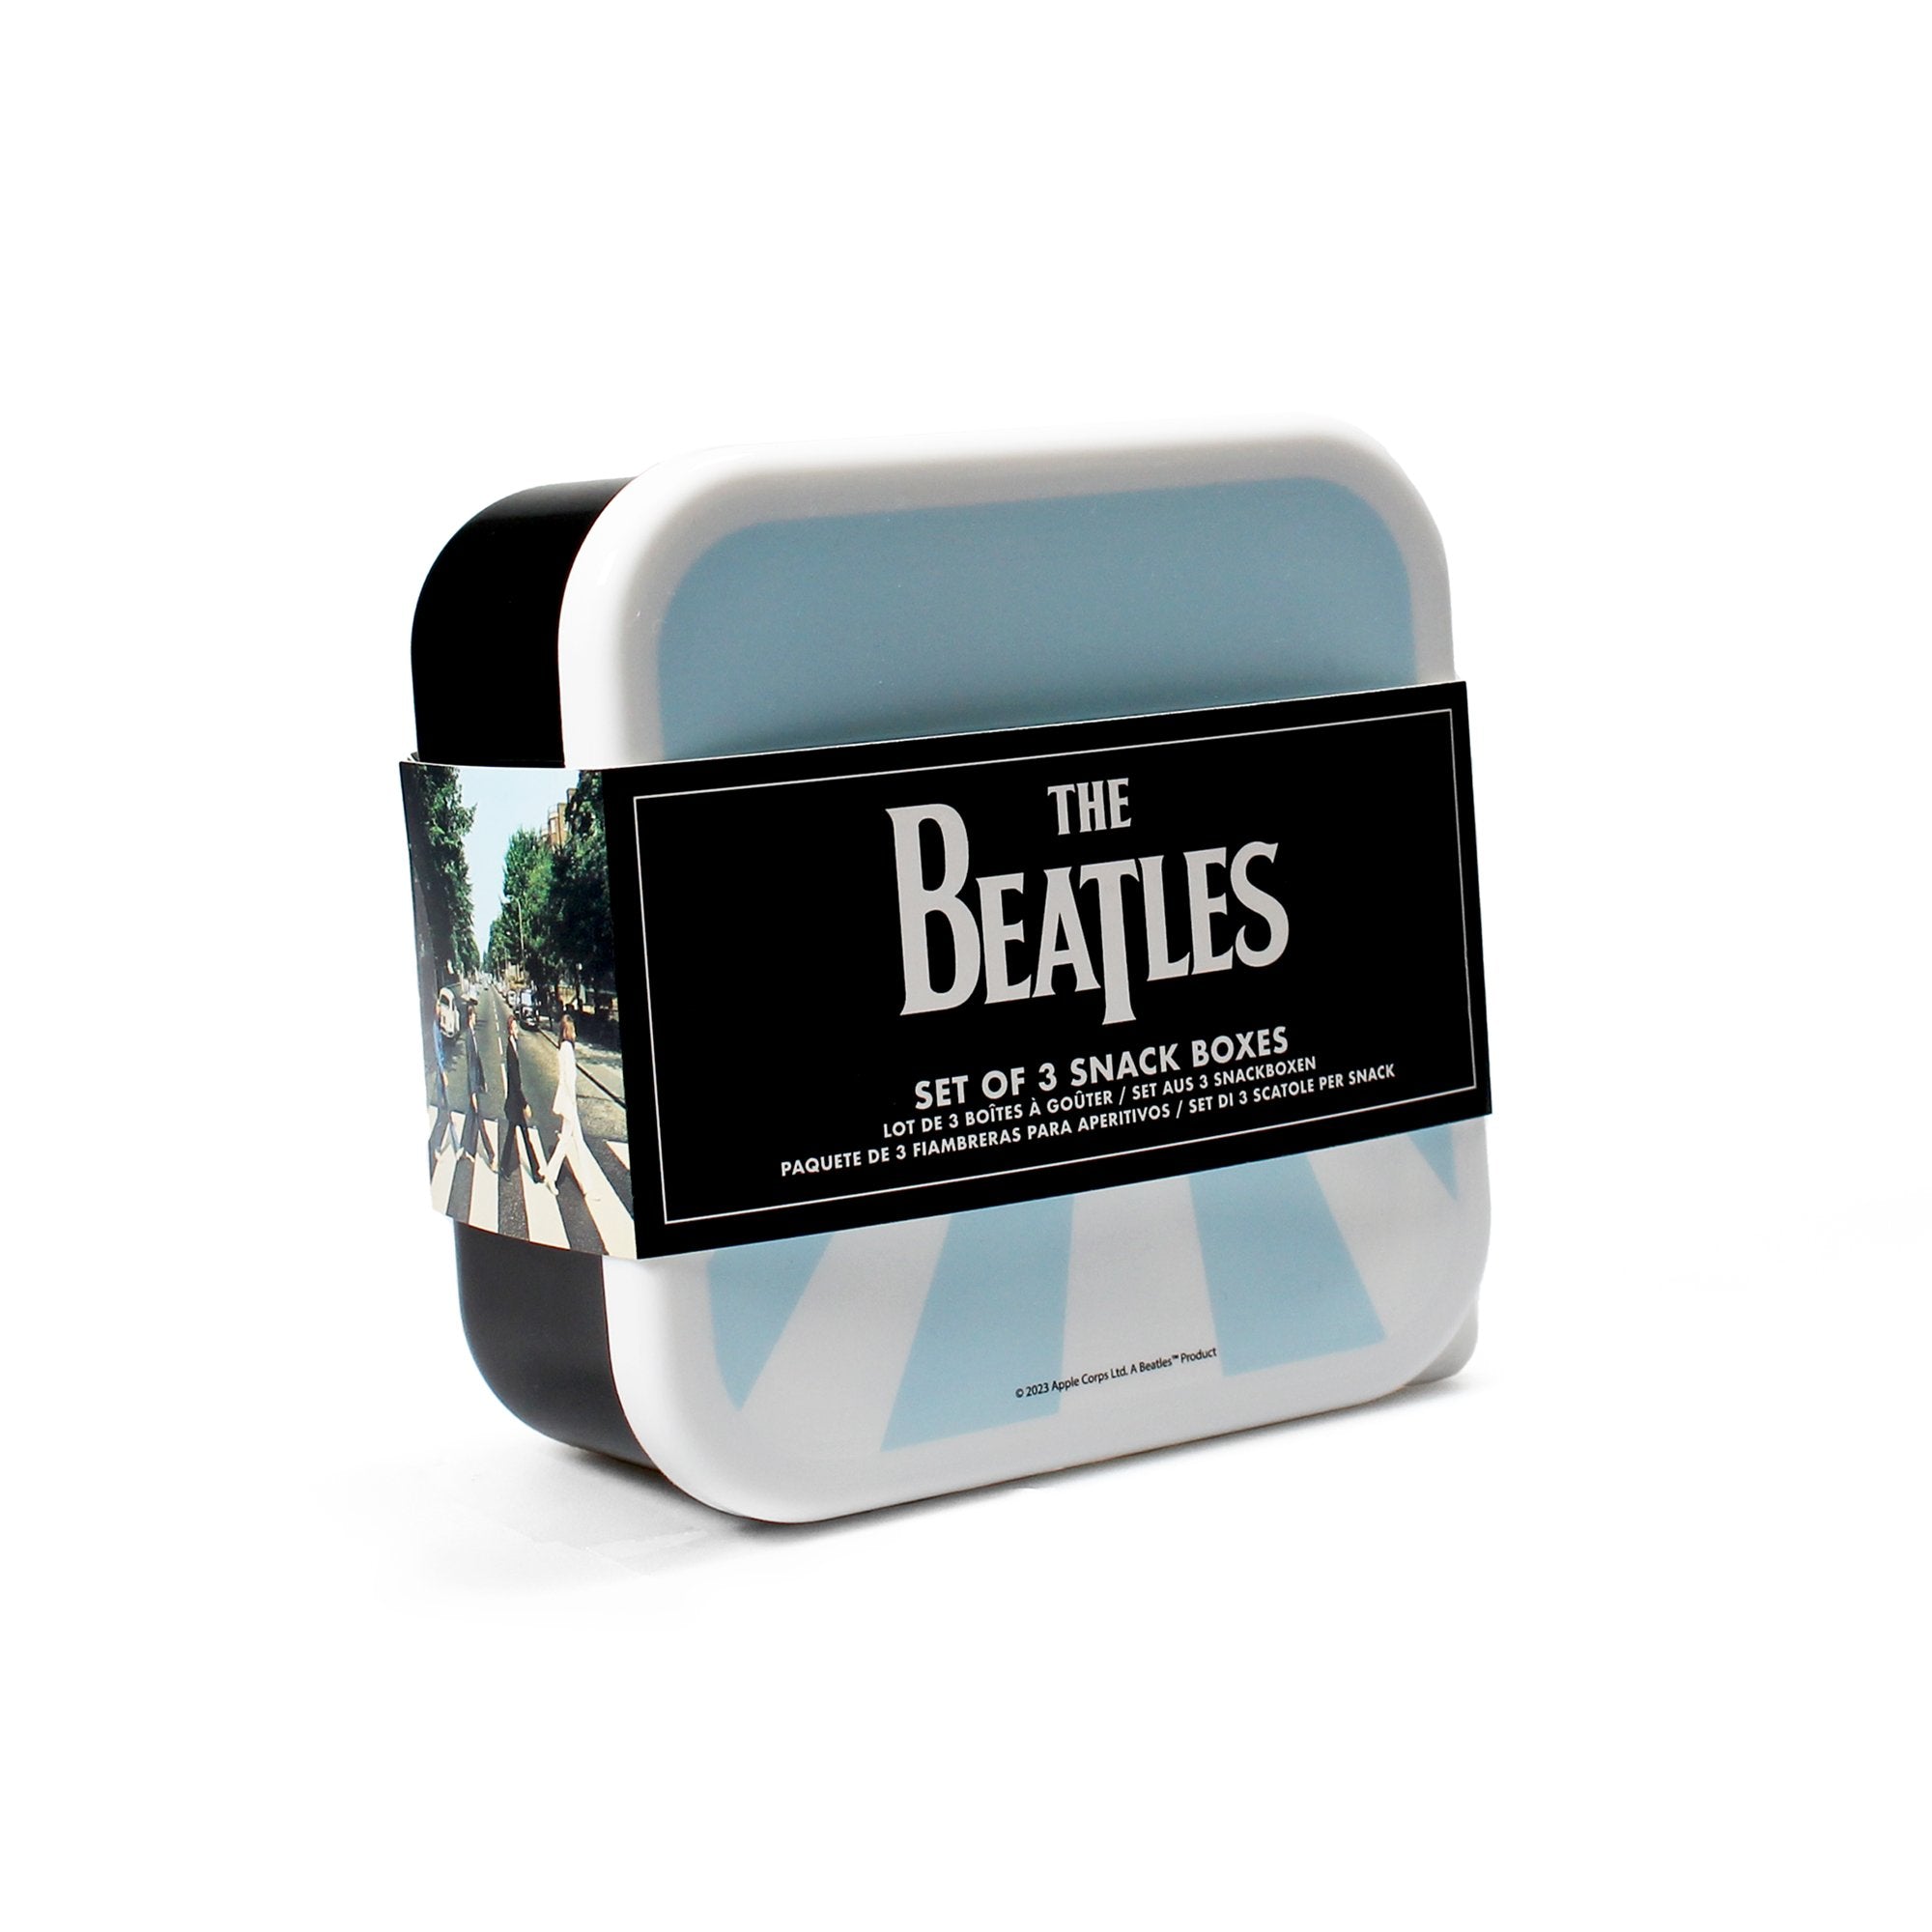 Snack Boxes Set of 3 - The Beatles (Abbey Road)